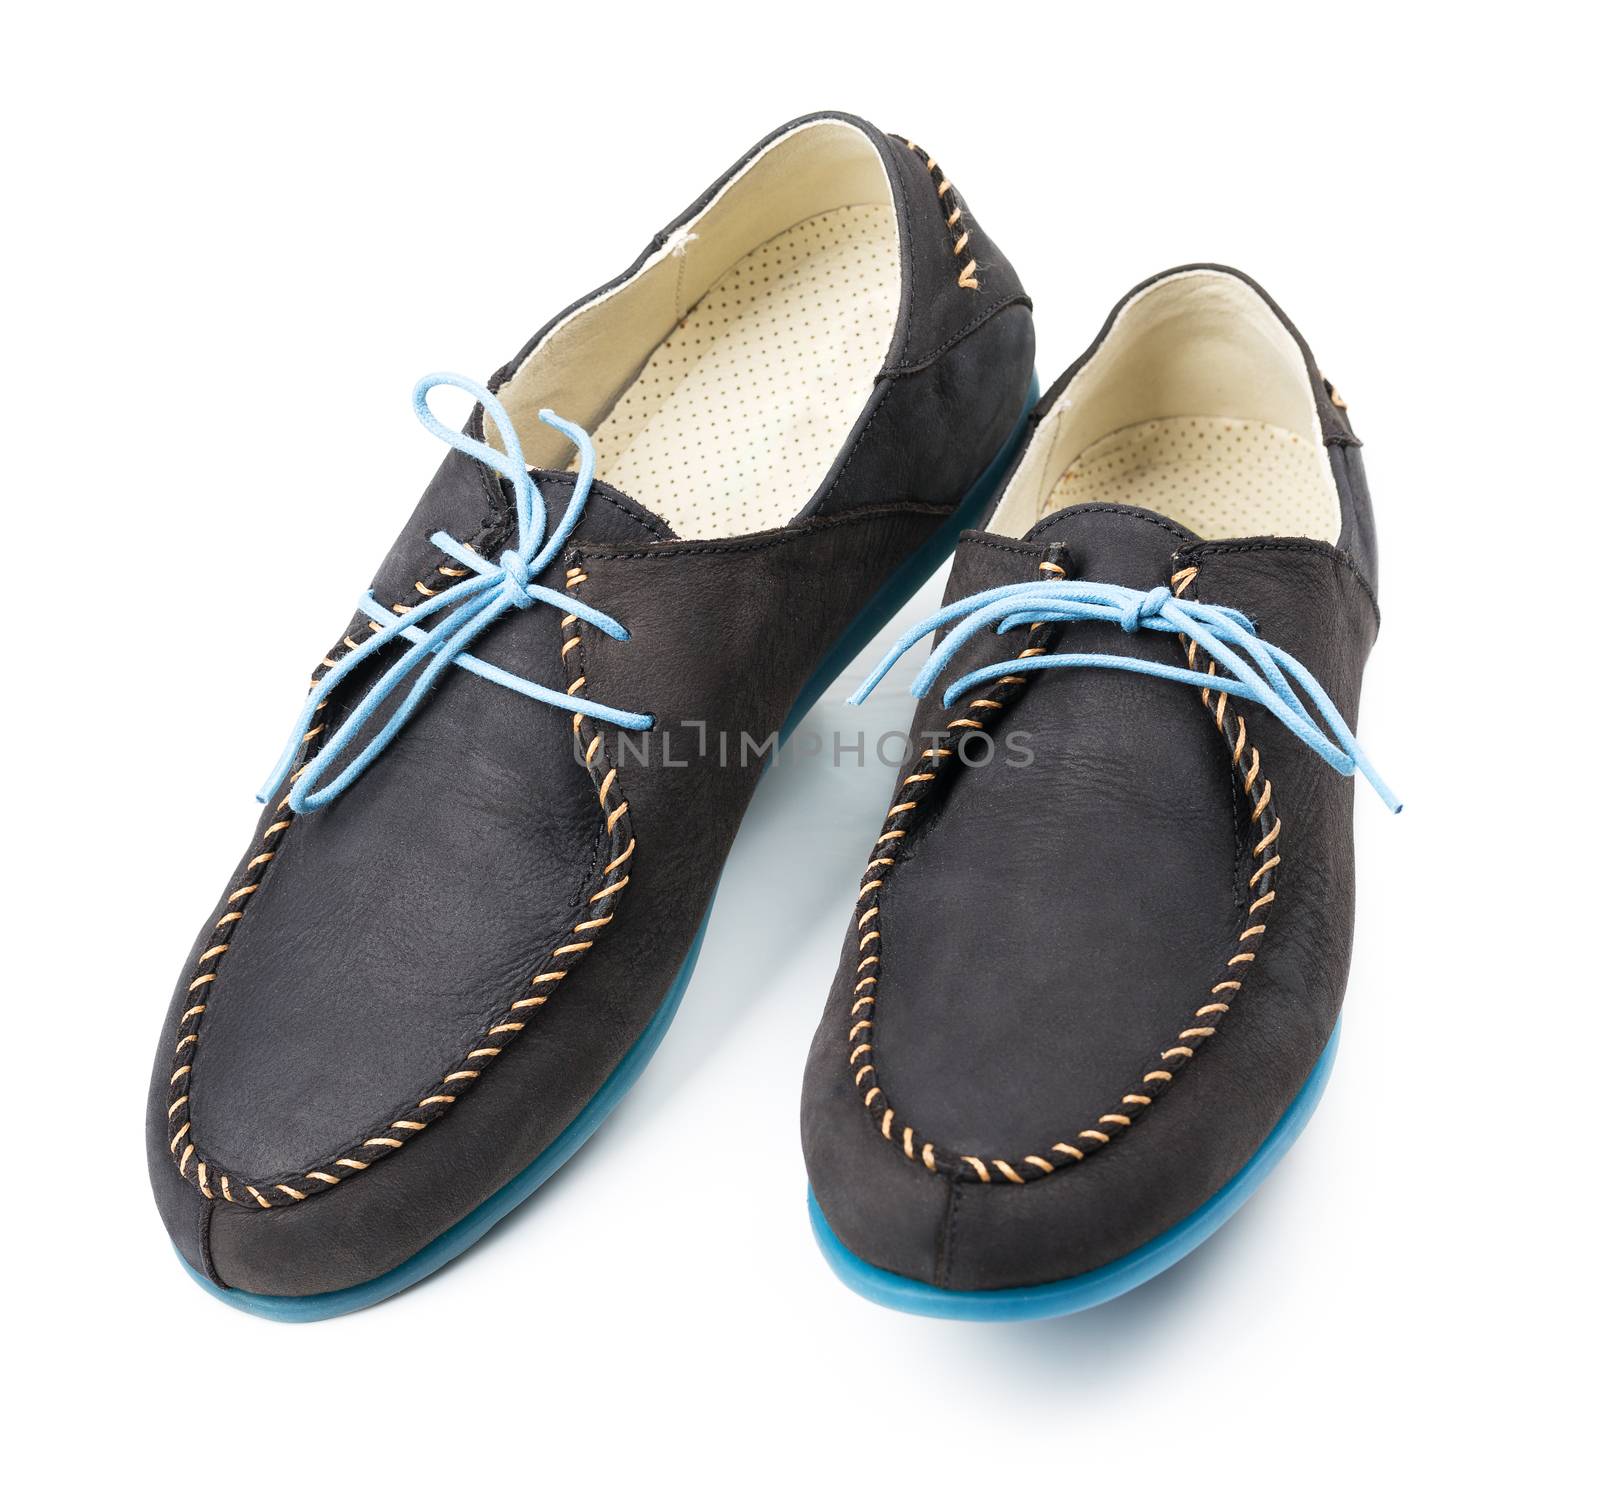 Black men's leather loafers with blue soles and laces on a white by vlad_star